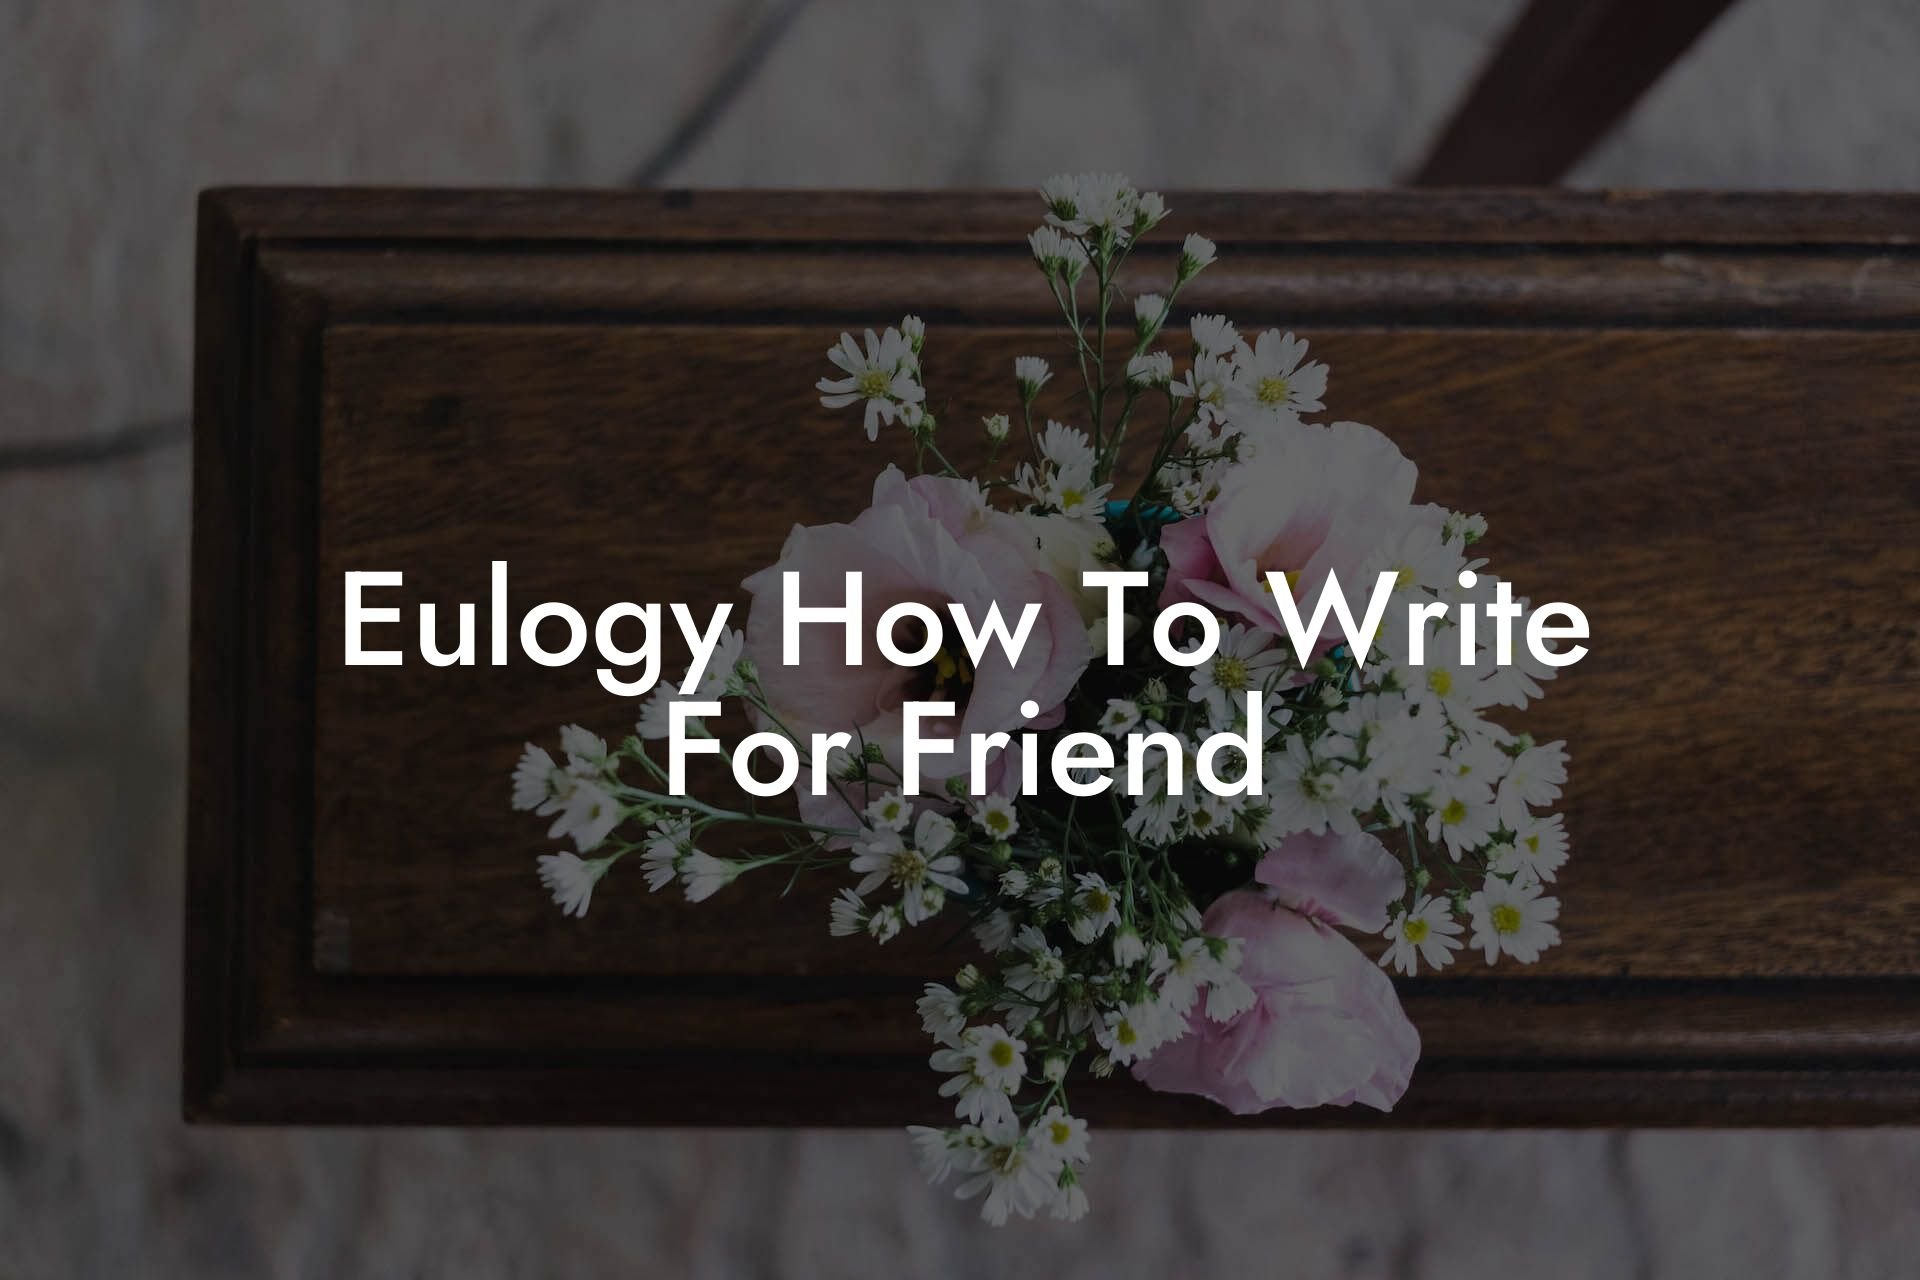 Eulogy How To Write For Friend